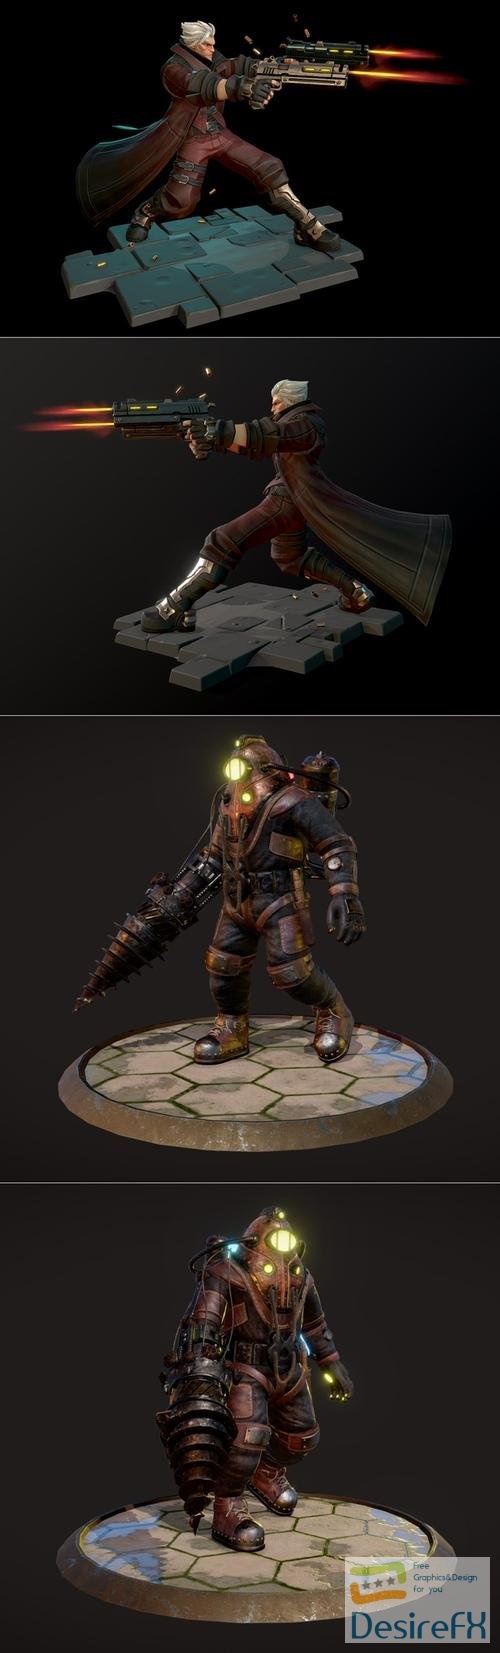 Dante - Devil May Cry and Big Daddy Bioshock 2 – 3D Print